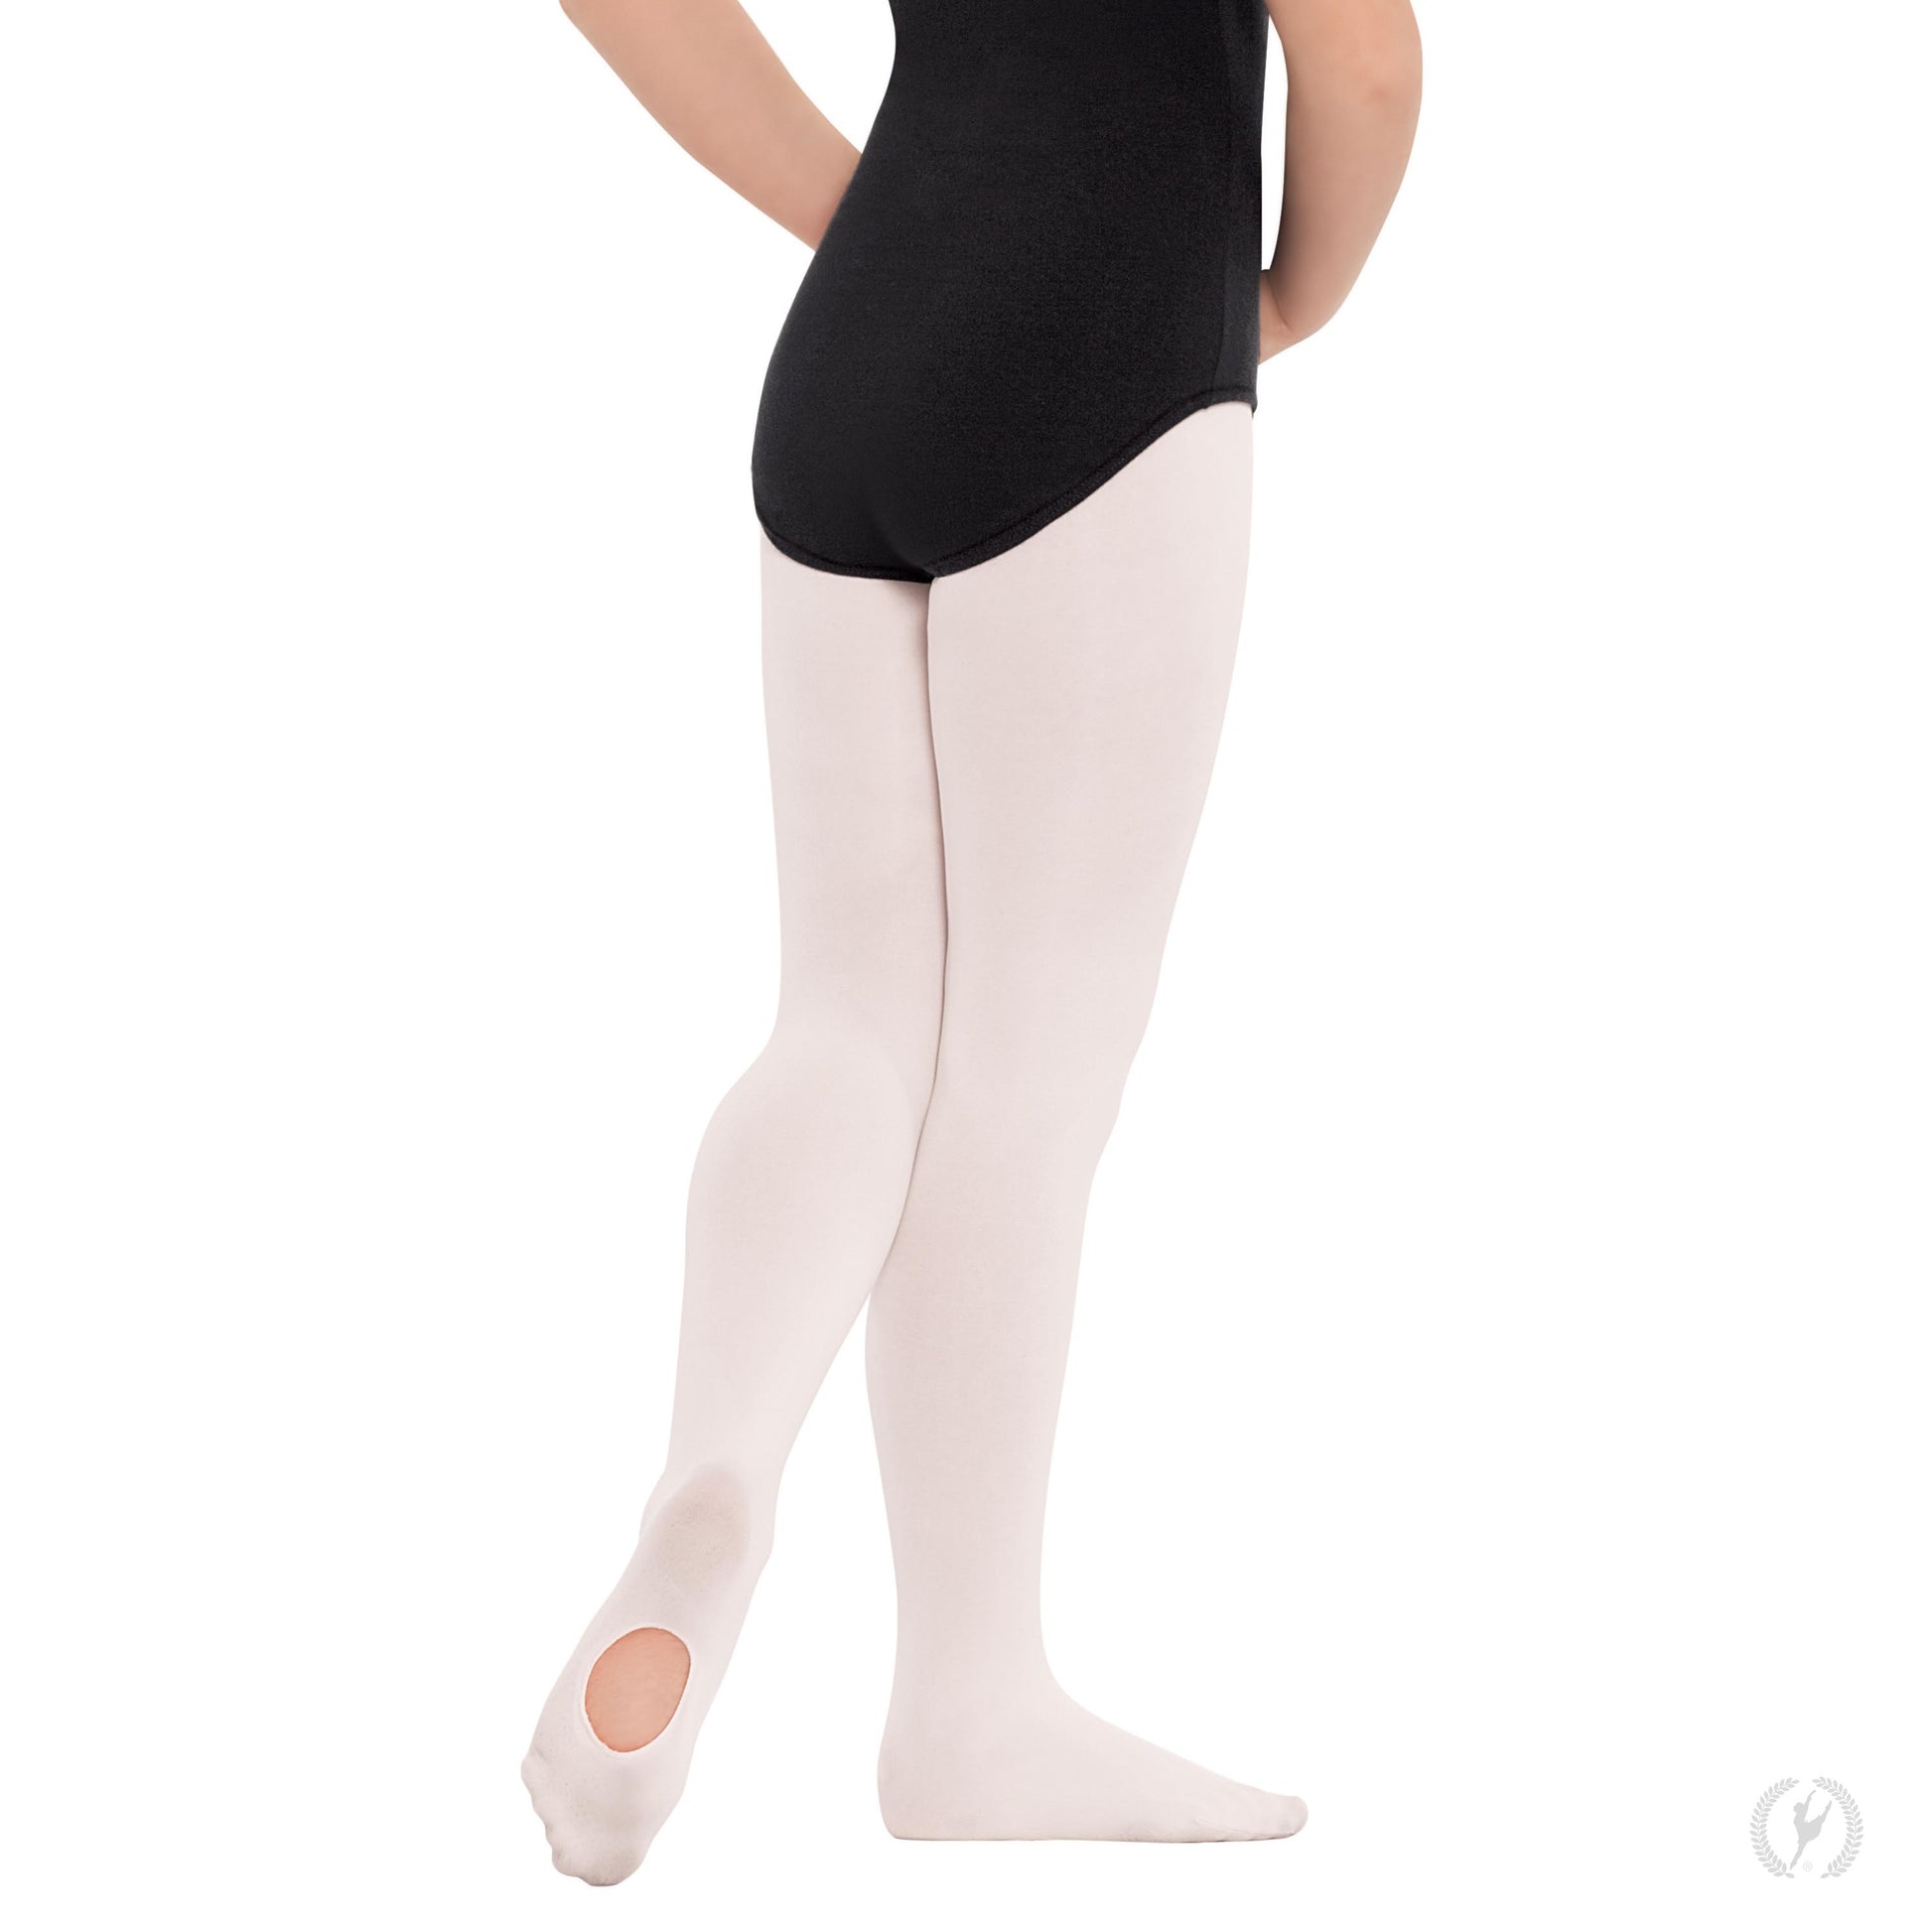 Eurotard 210c Non-Run Convertible Tights in White sold by Dance Fashions Superstore in Roswell, Georgia. Dance Tights in White for Girls.